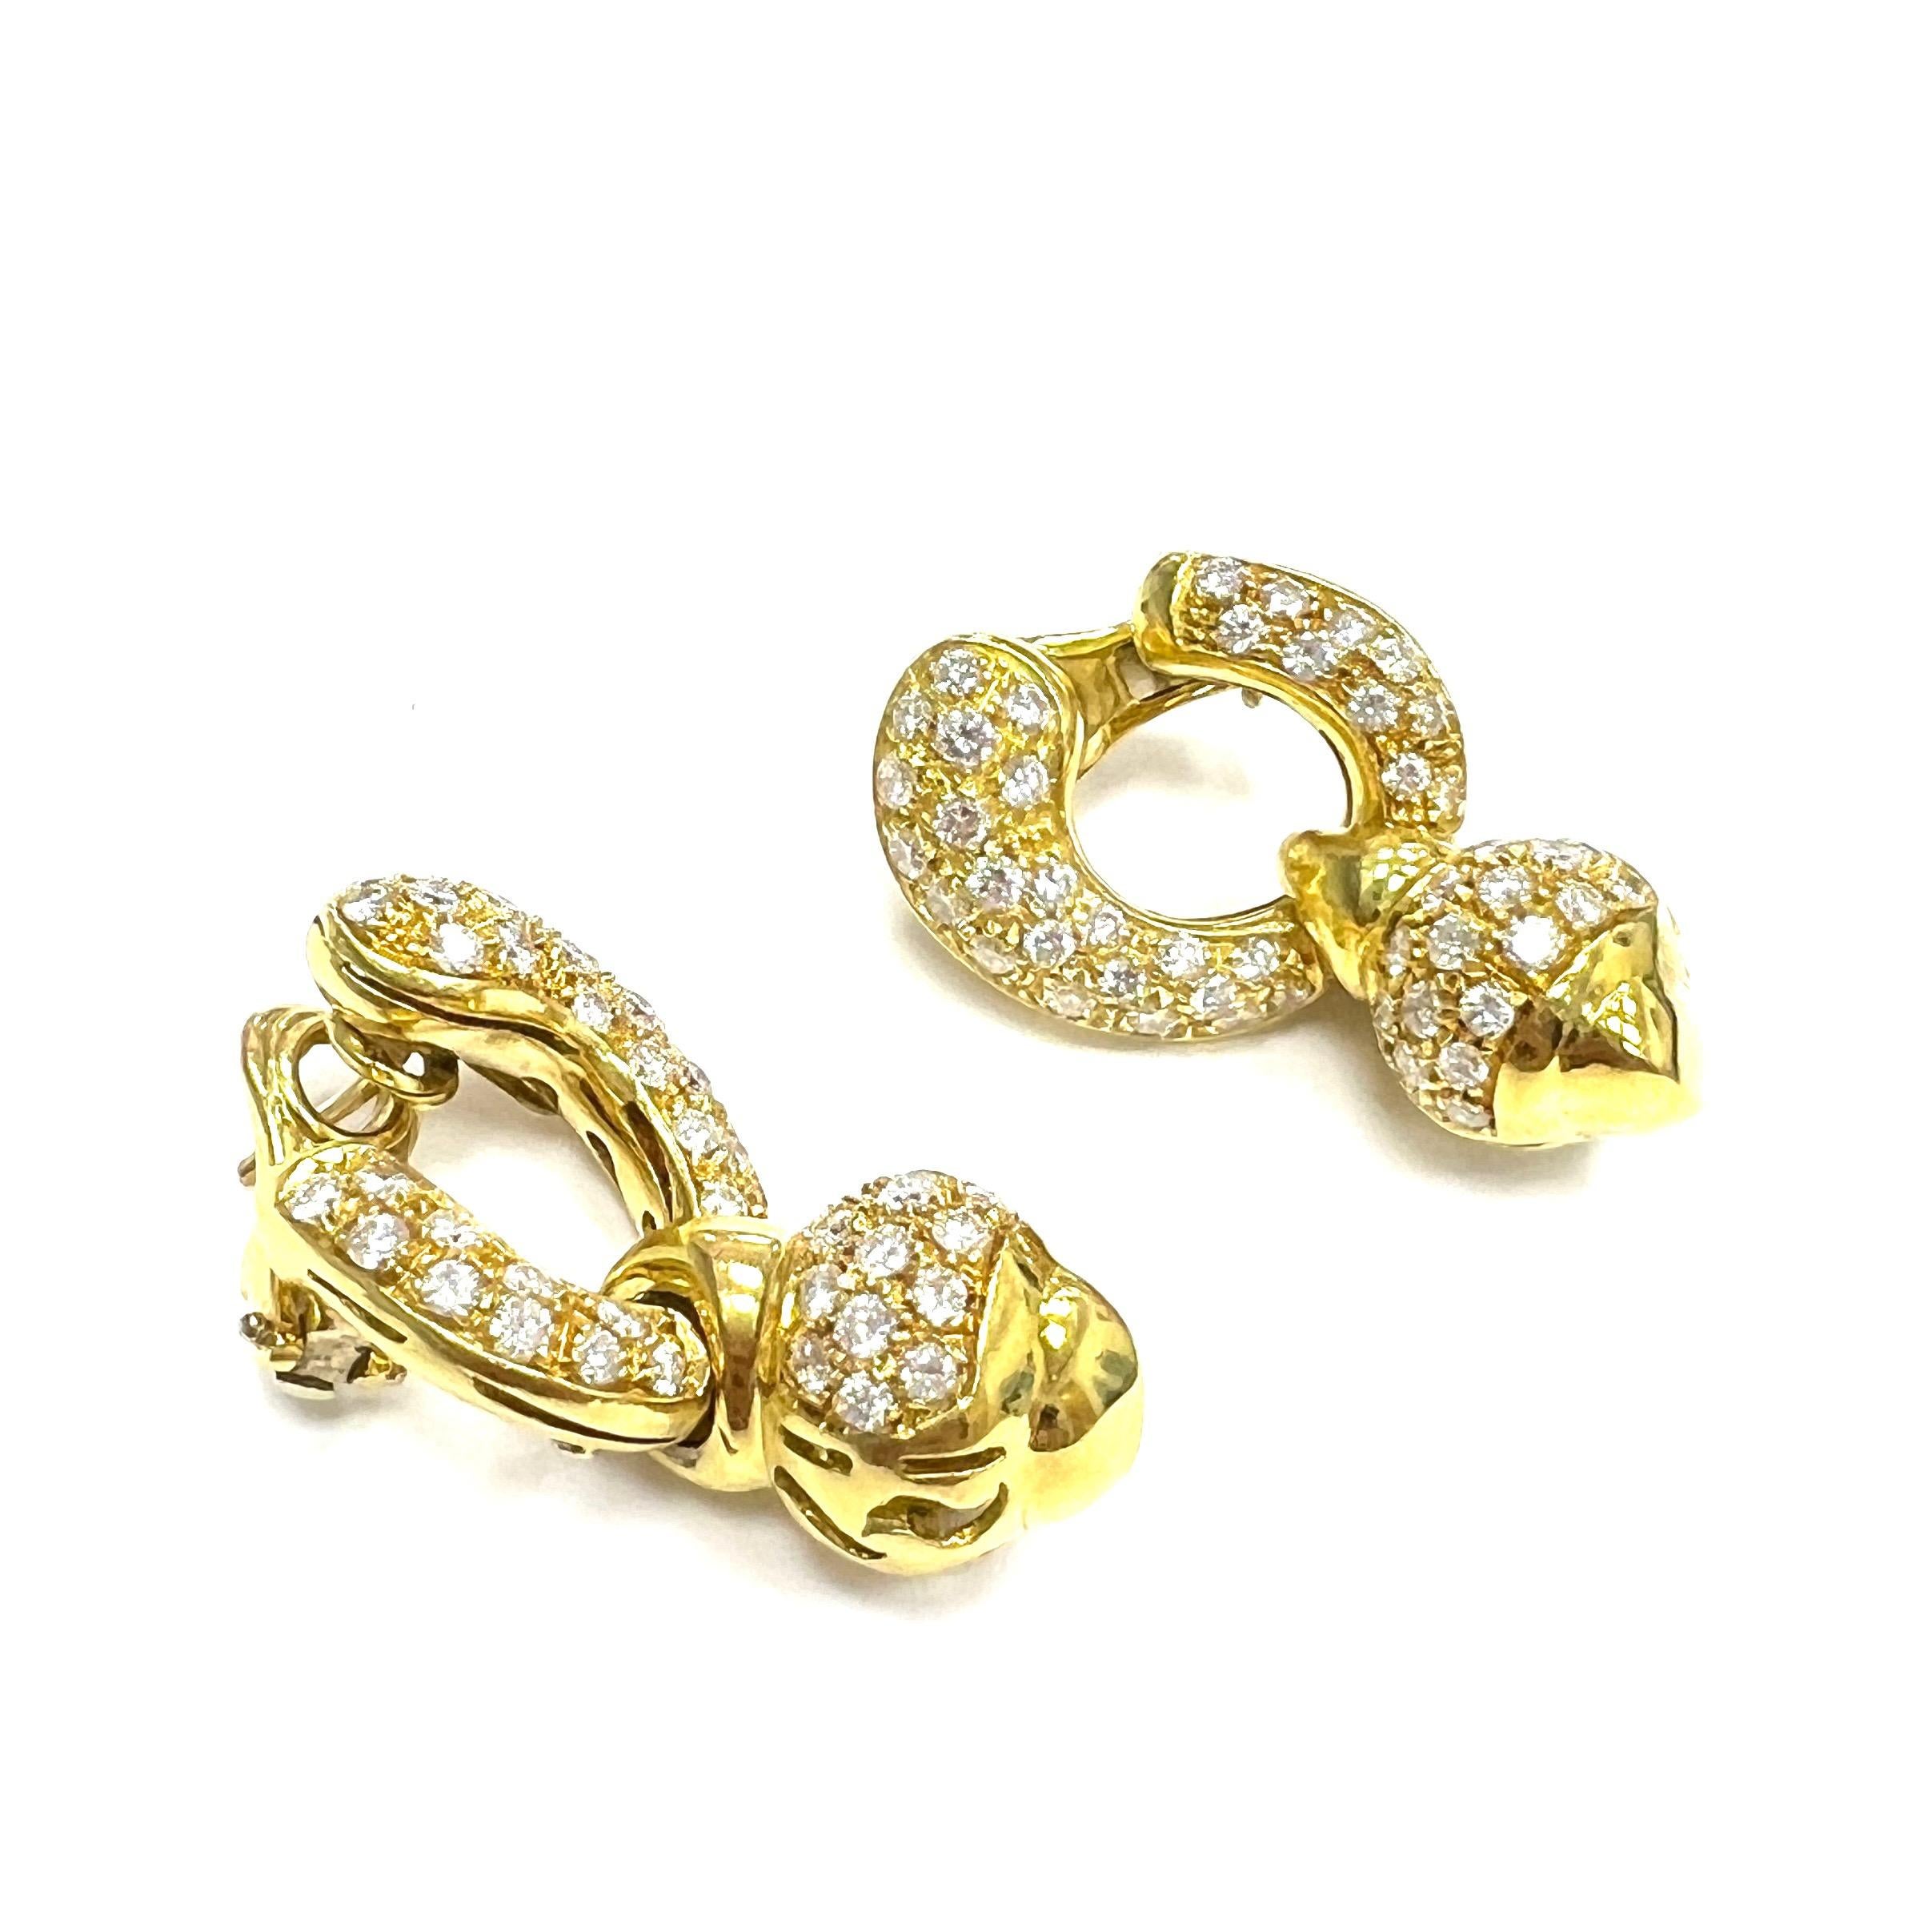 Round Cut Bvlgari-Styled 18k Diamond Yellow Gold Earrings For Sale